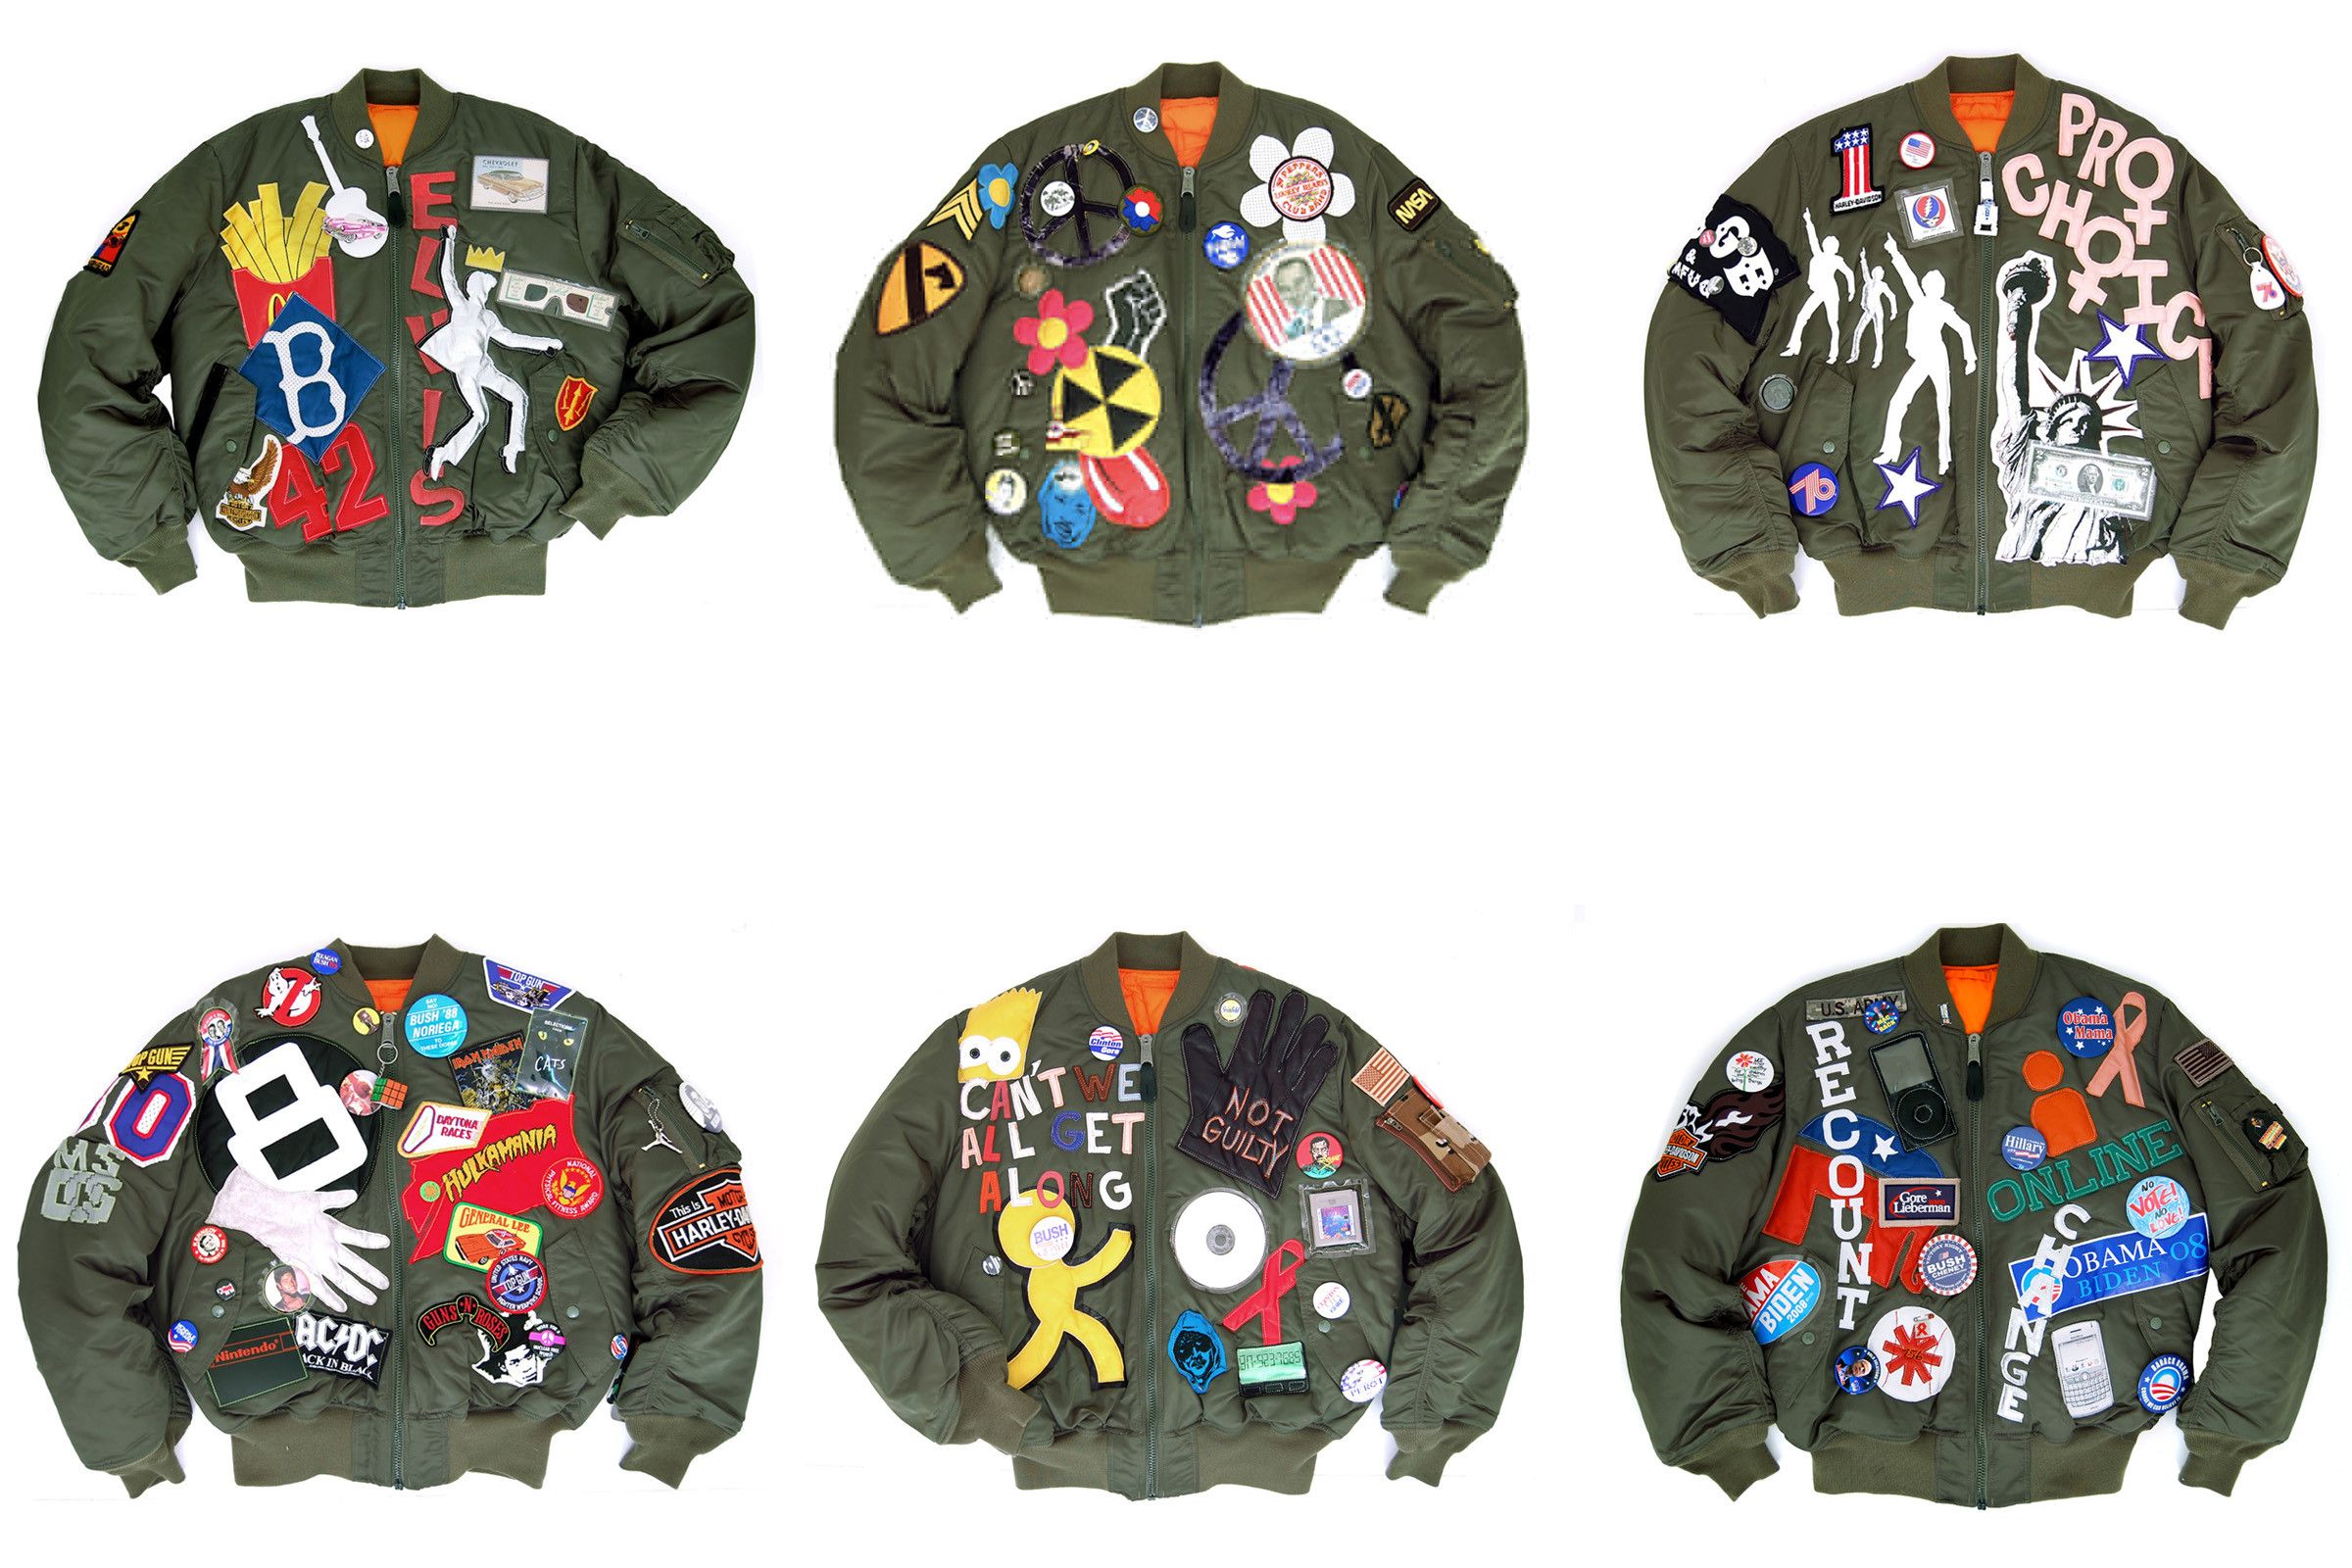 Brian Wood's "Alpha Industries: 6 Decades of History" 50th anniversary jackets. Each jacket is customized to represent a particular decade: the 1950s (top left), the 1960s (top center), the 1970s (top right), the 1980s (bottom left), the 1990s (bottom center) and the 2000s.